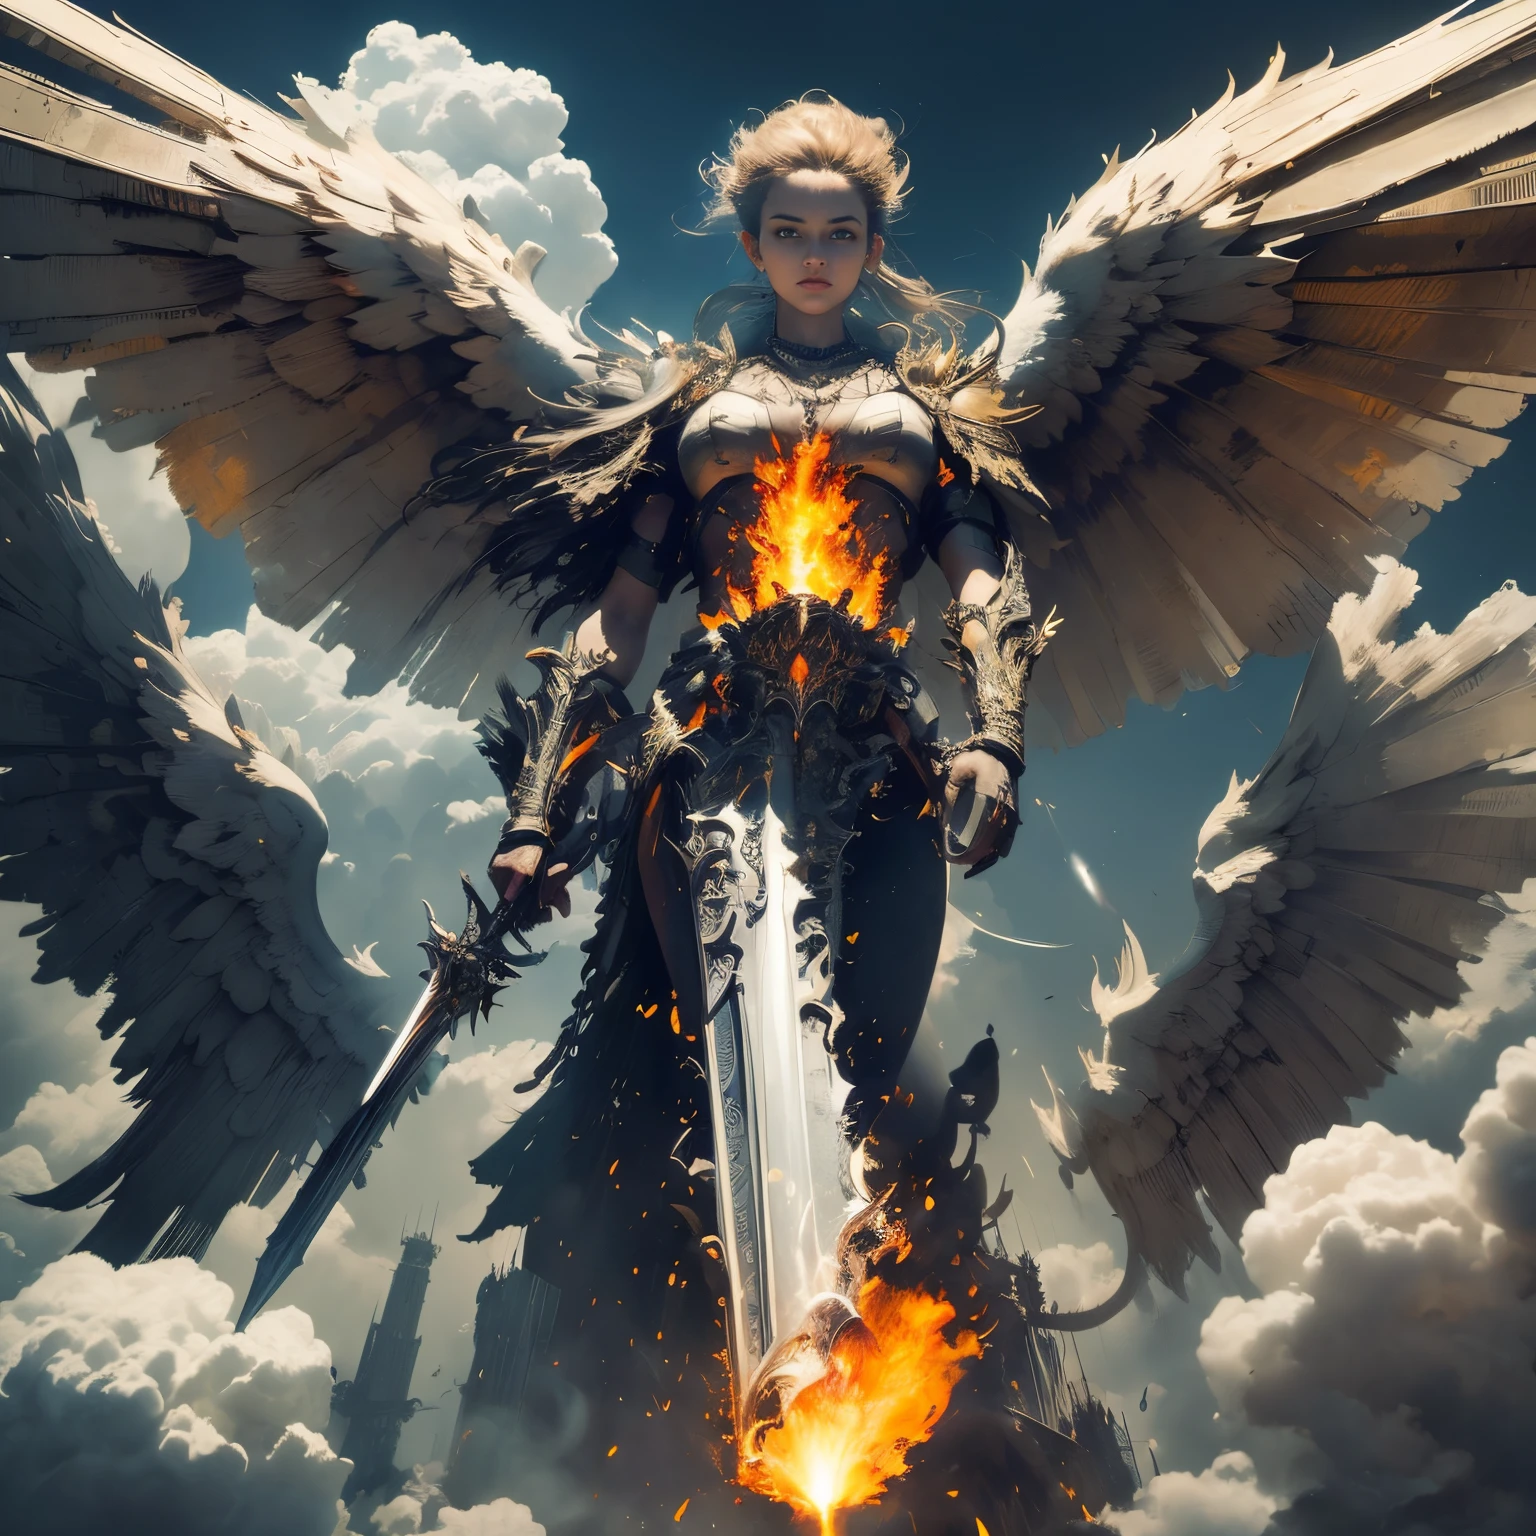 (mechanical), thunderstorm, having sword on fire, necklace on fire, (apocalypse), (flying above the city), huge angel, in the city, huge fire looks like wings,